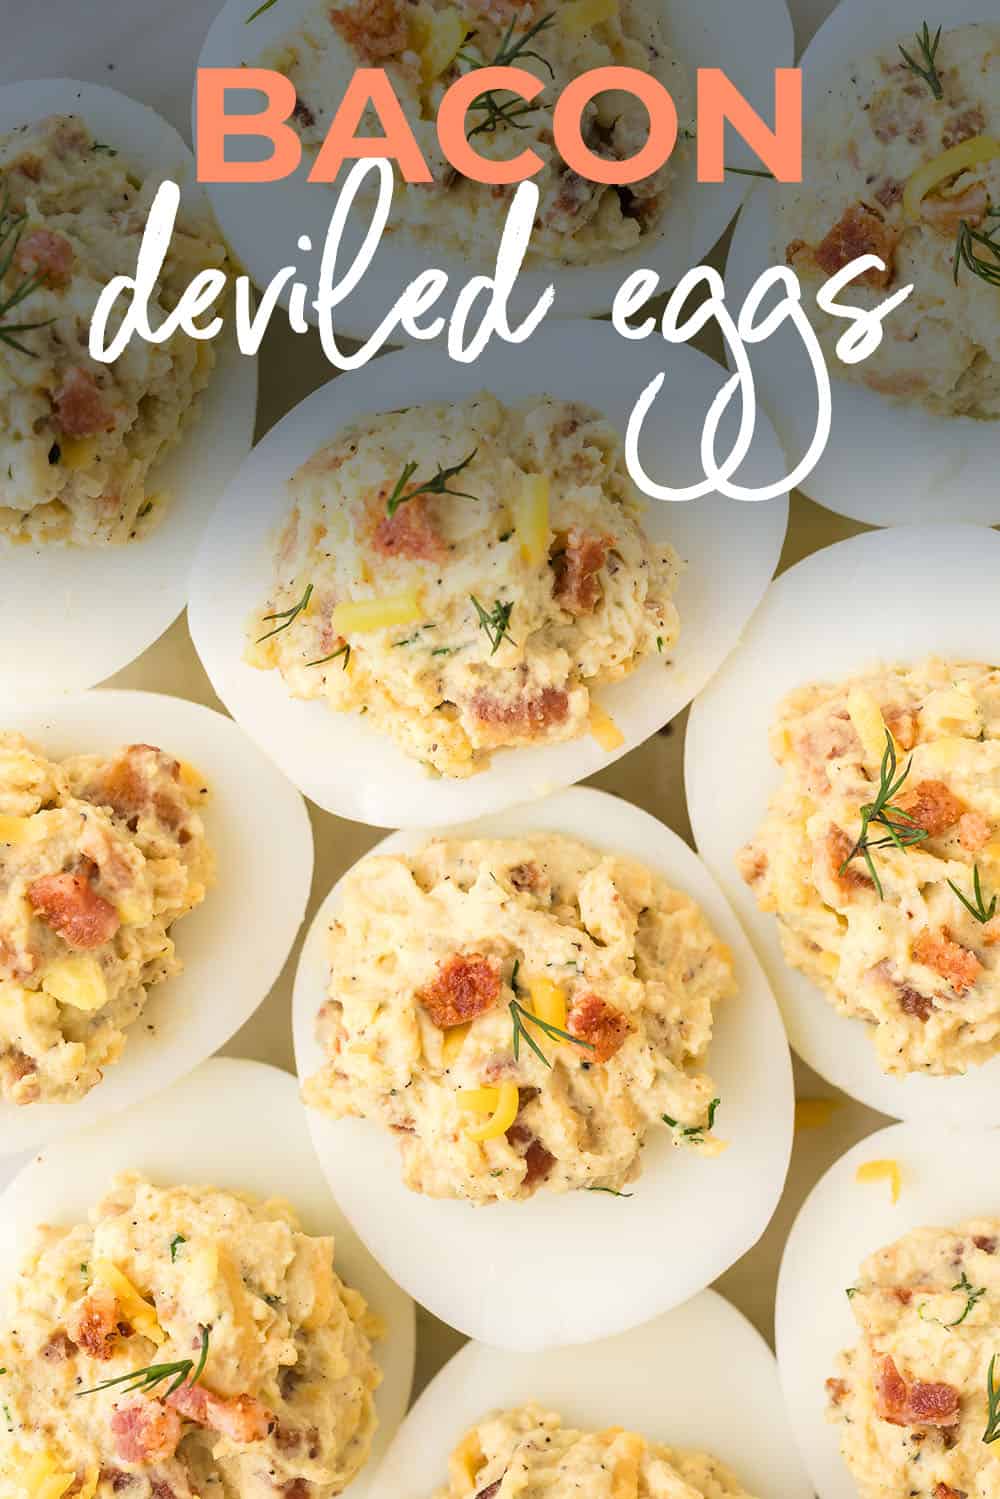 Bacon deviled eggs with text for Pinterest.